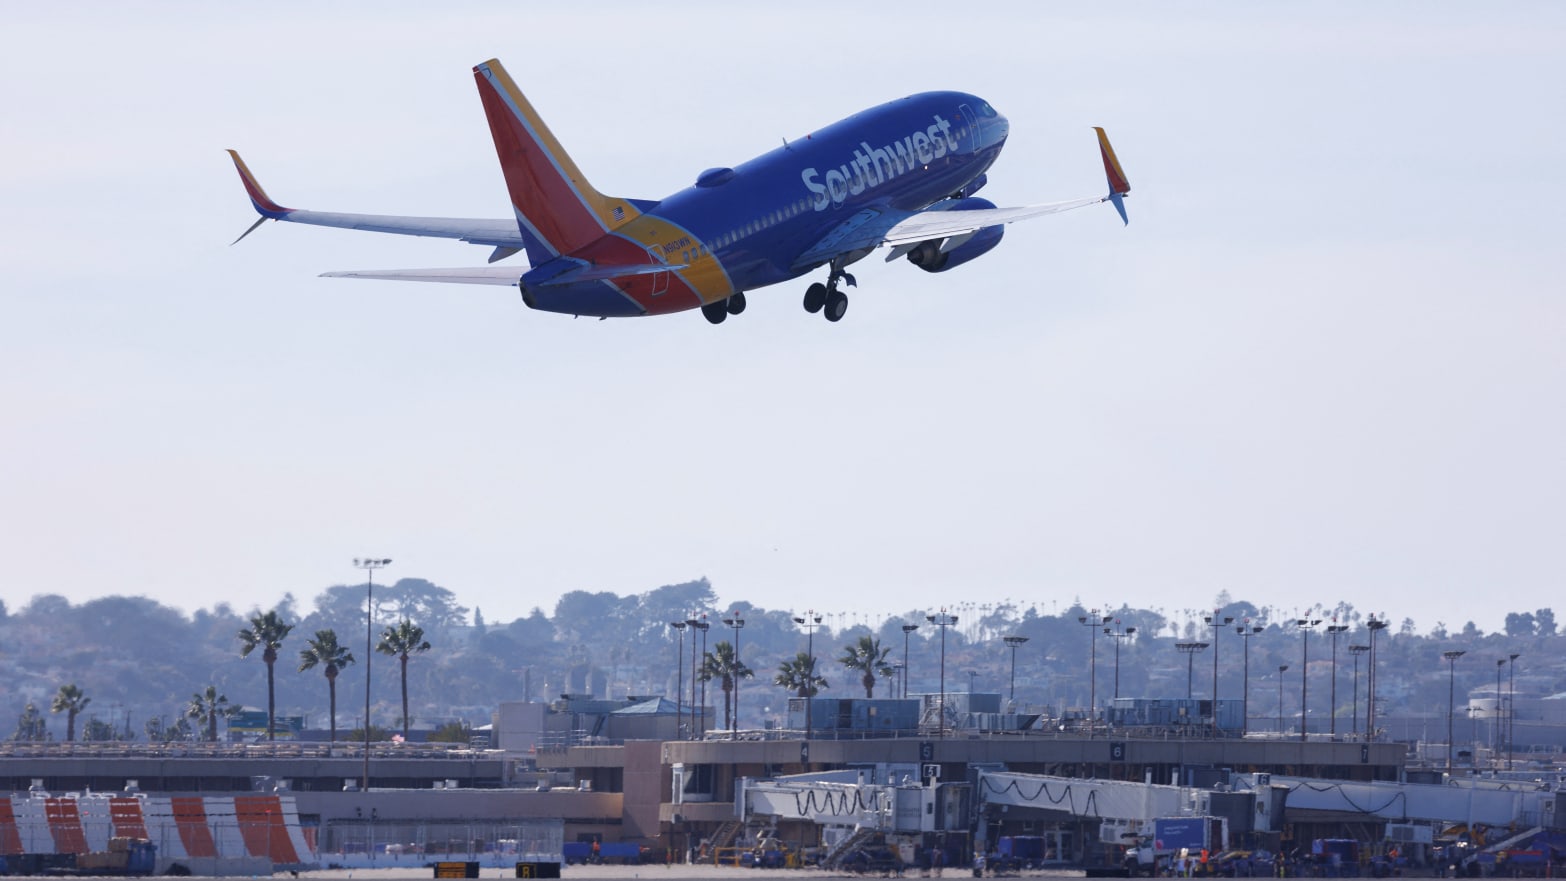 A Southwest passenger flight takes off from San Diego, California.